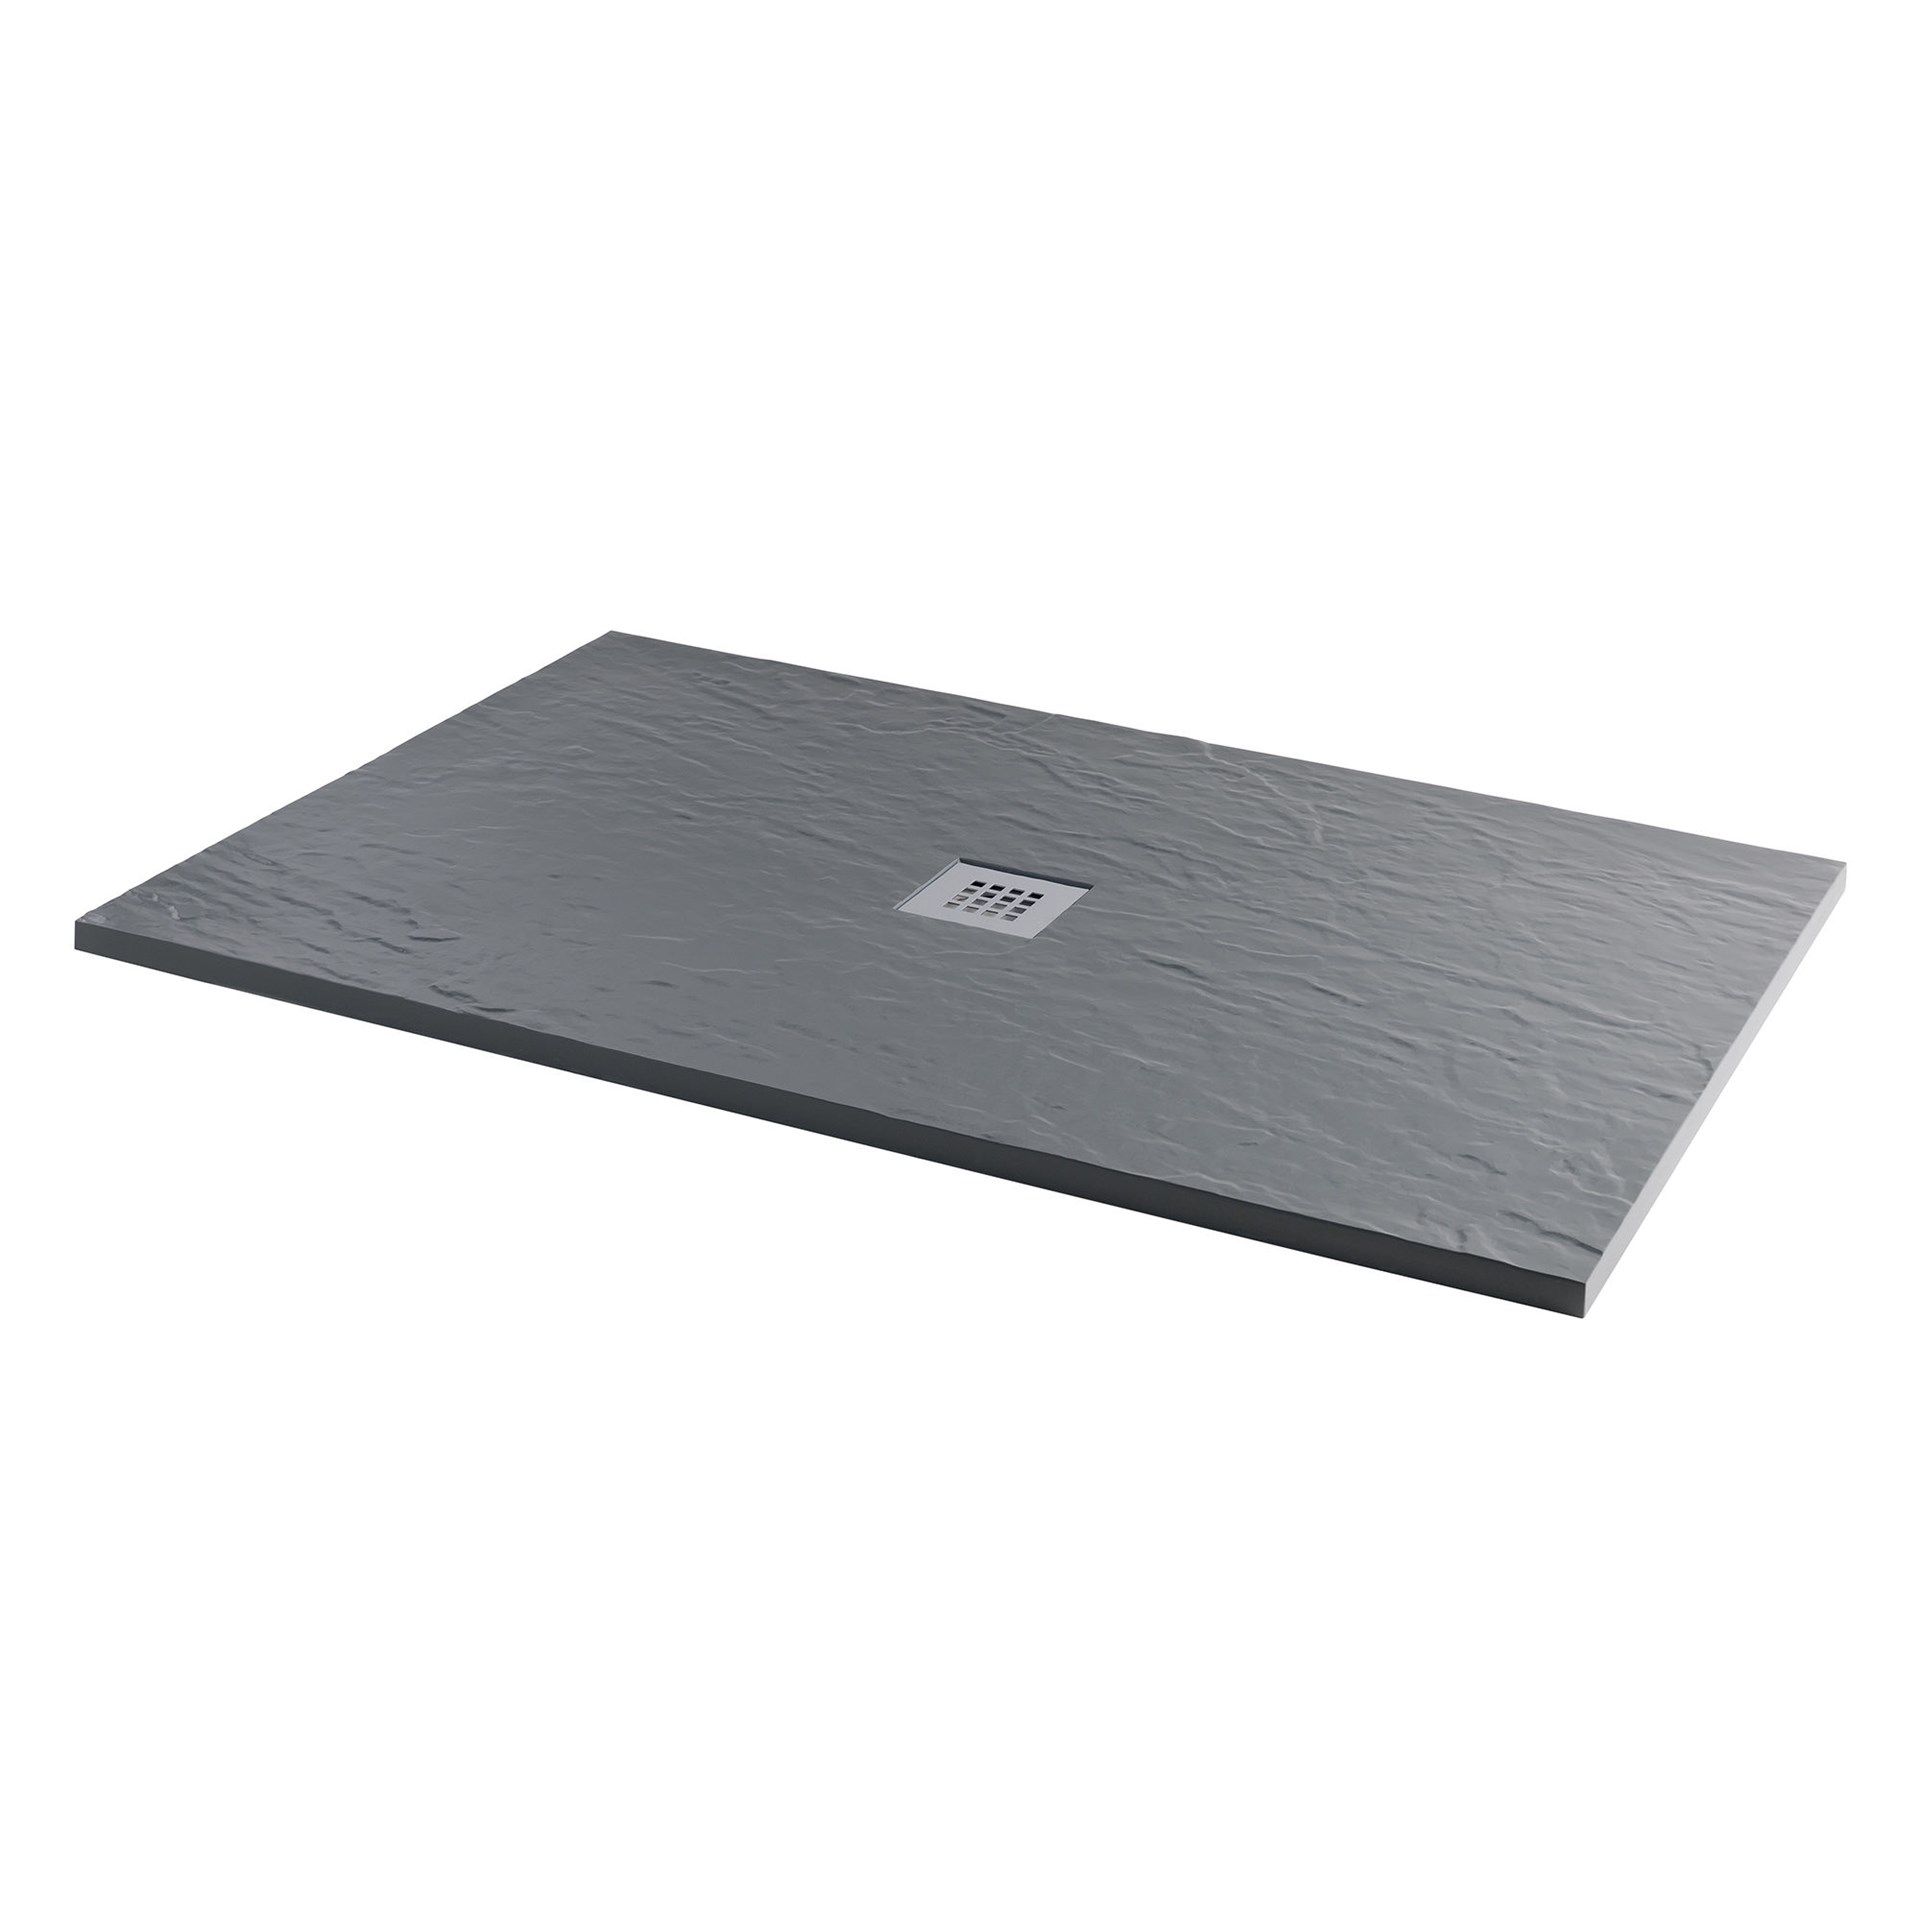 New (Uk70) 1400x900mm Rectangular Slate Effect Shower Tray In Grey. Manufactured In The Uk From... - Image 2 of 3